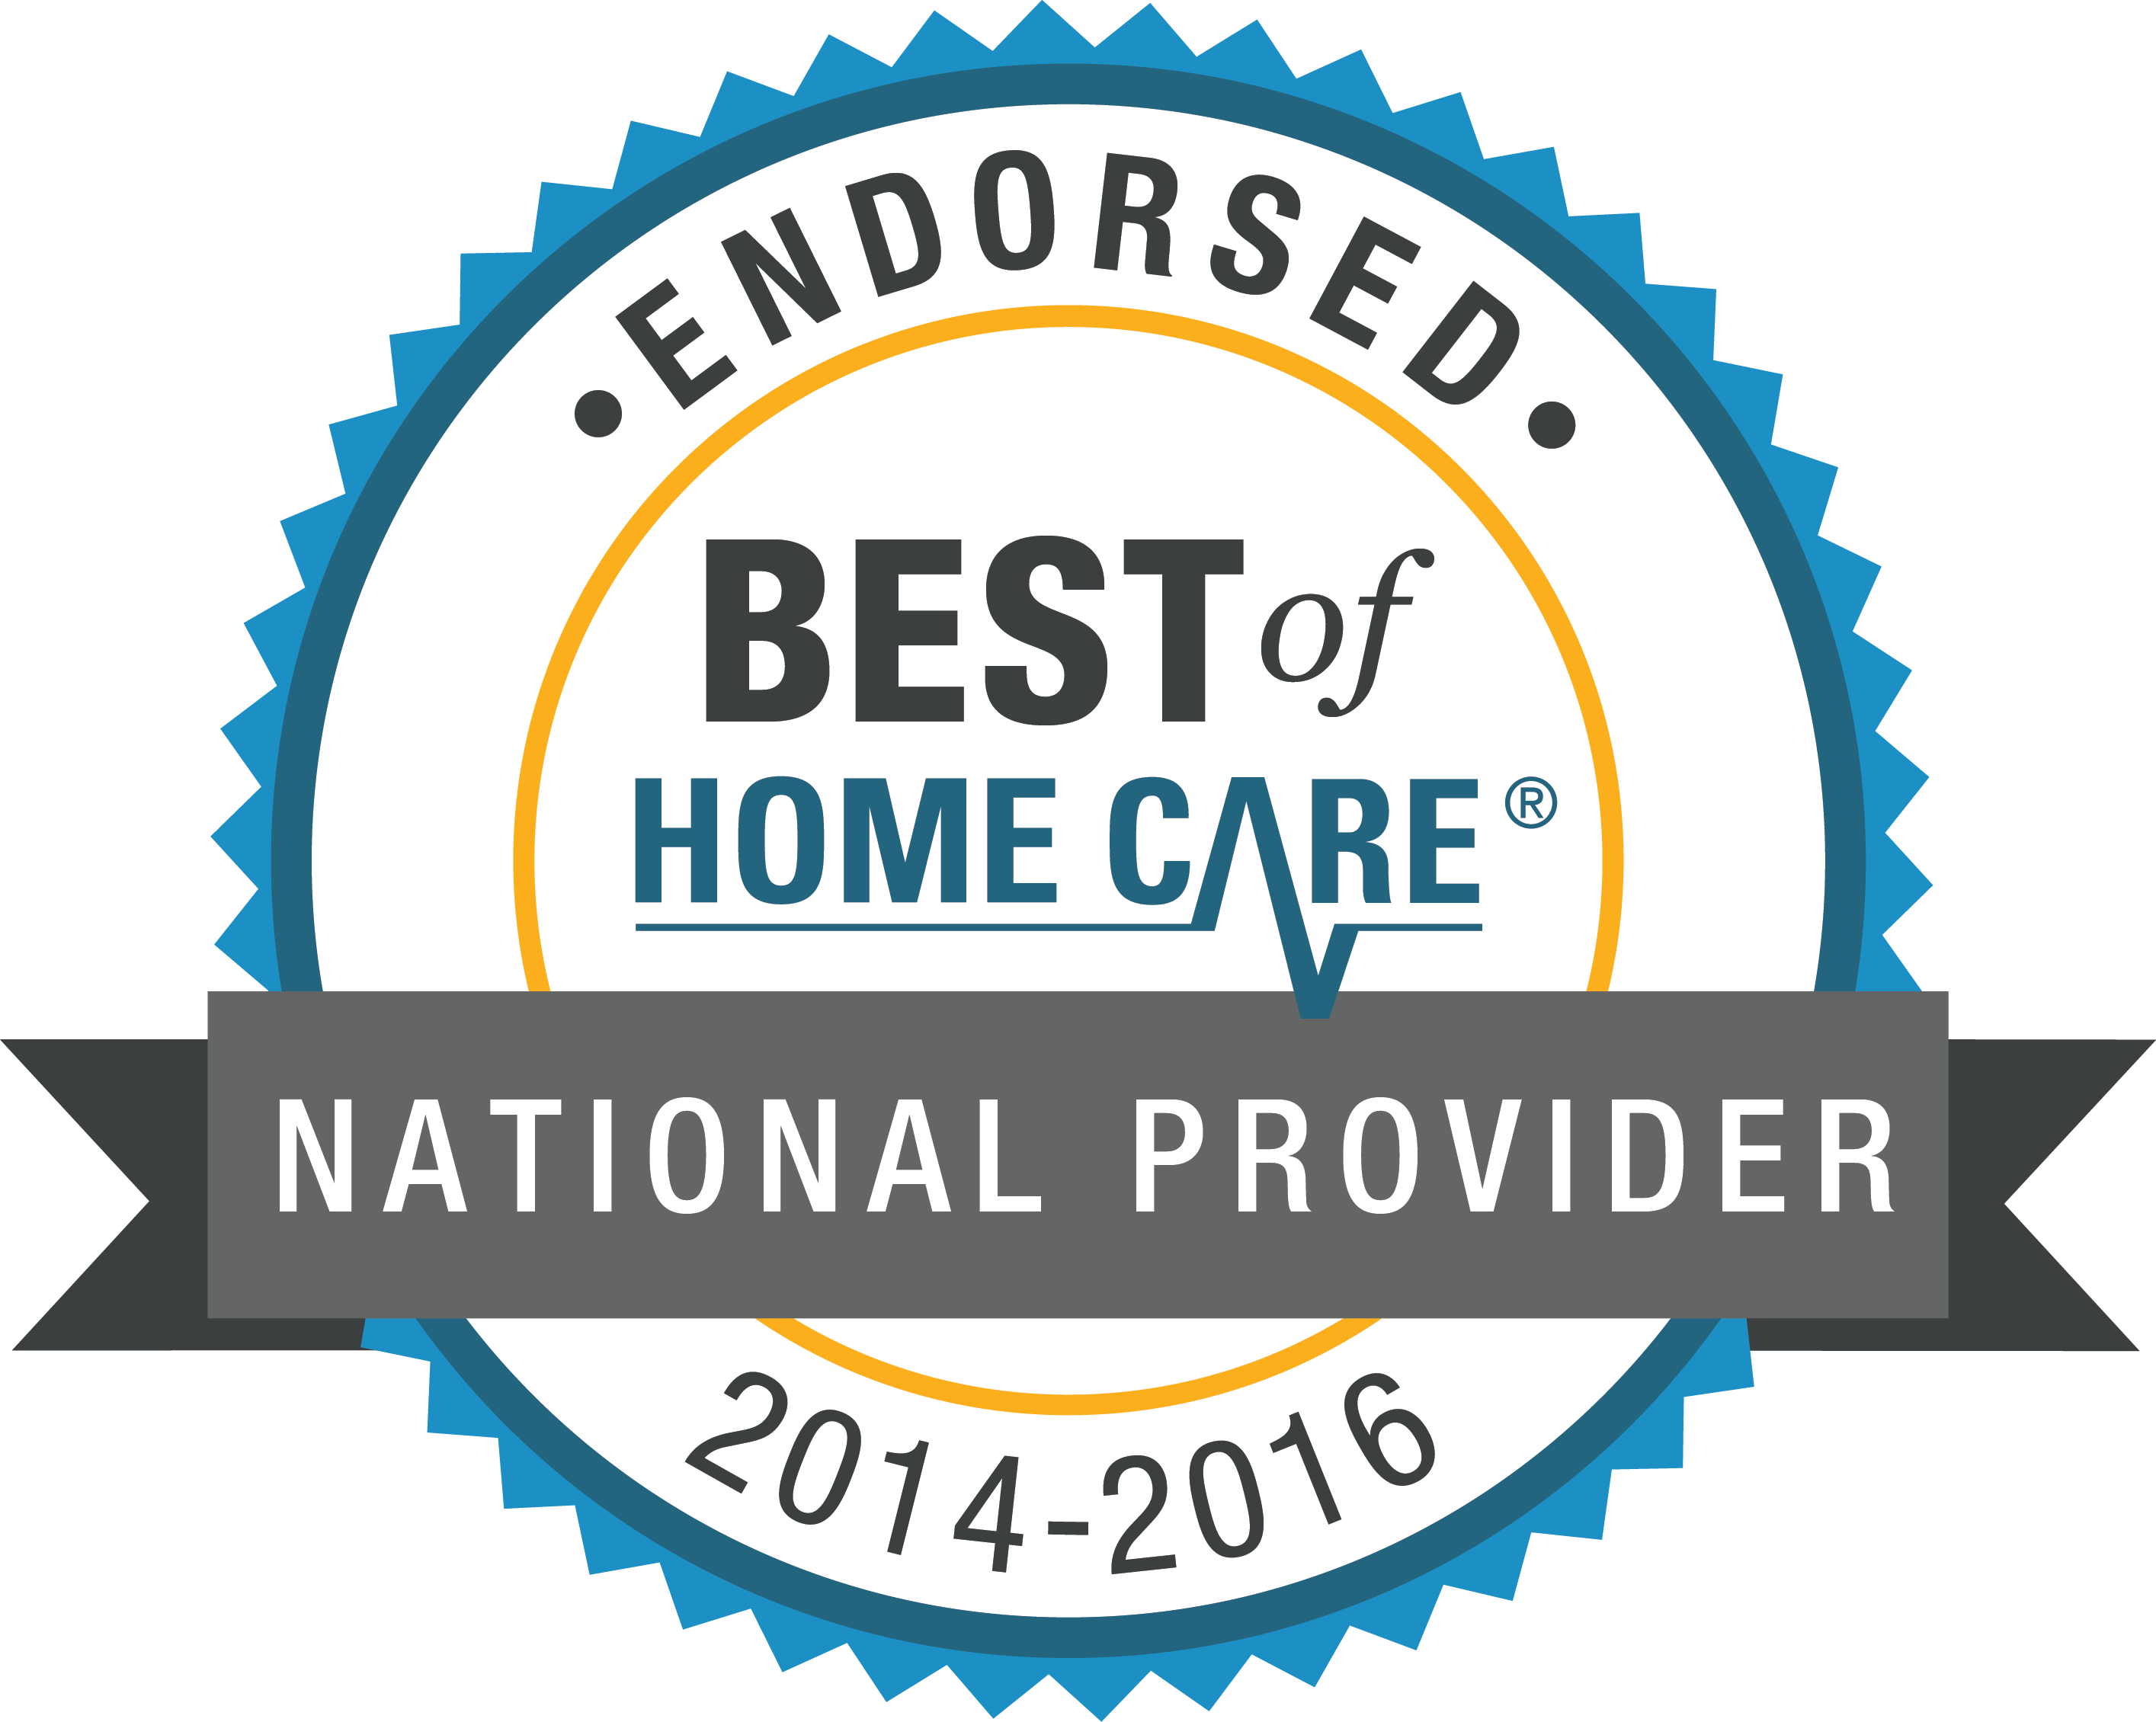 Endorsed Best of Home Care National Provider 2014-2016